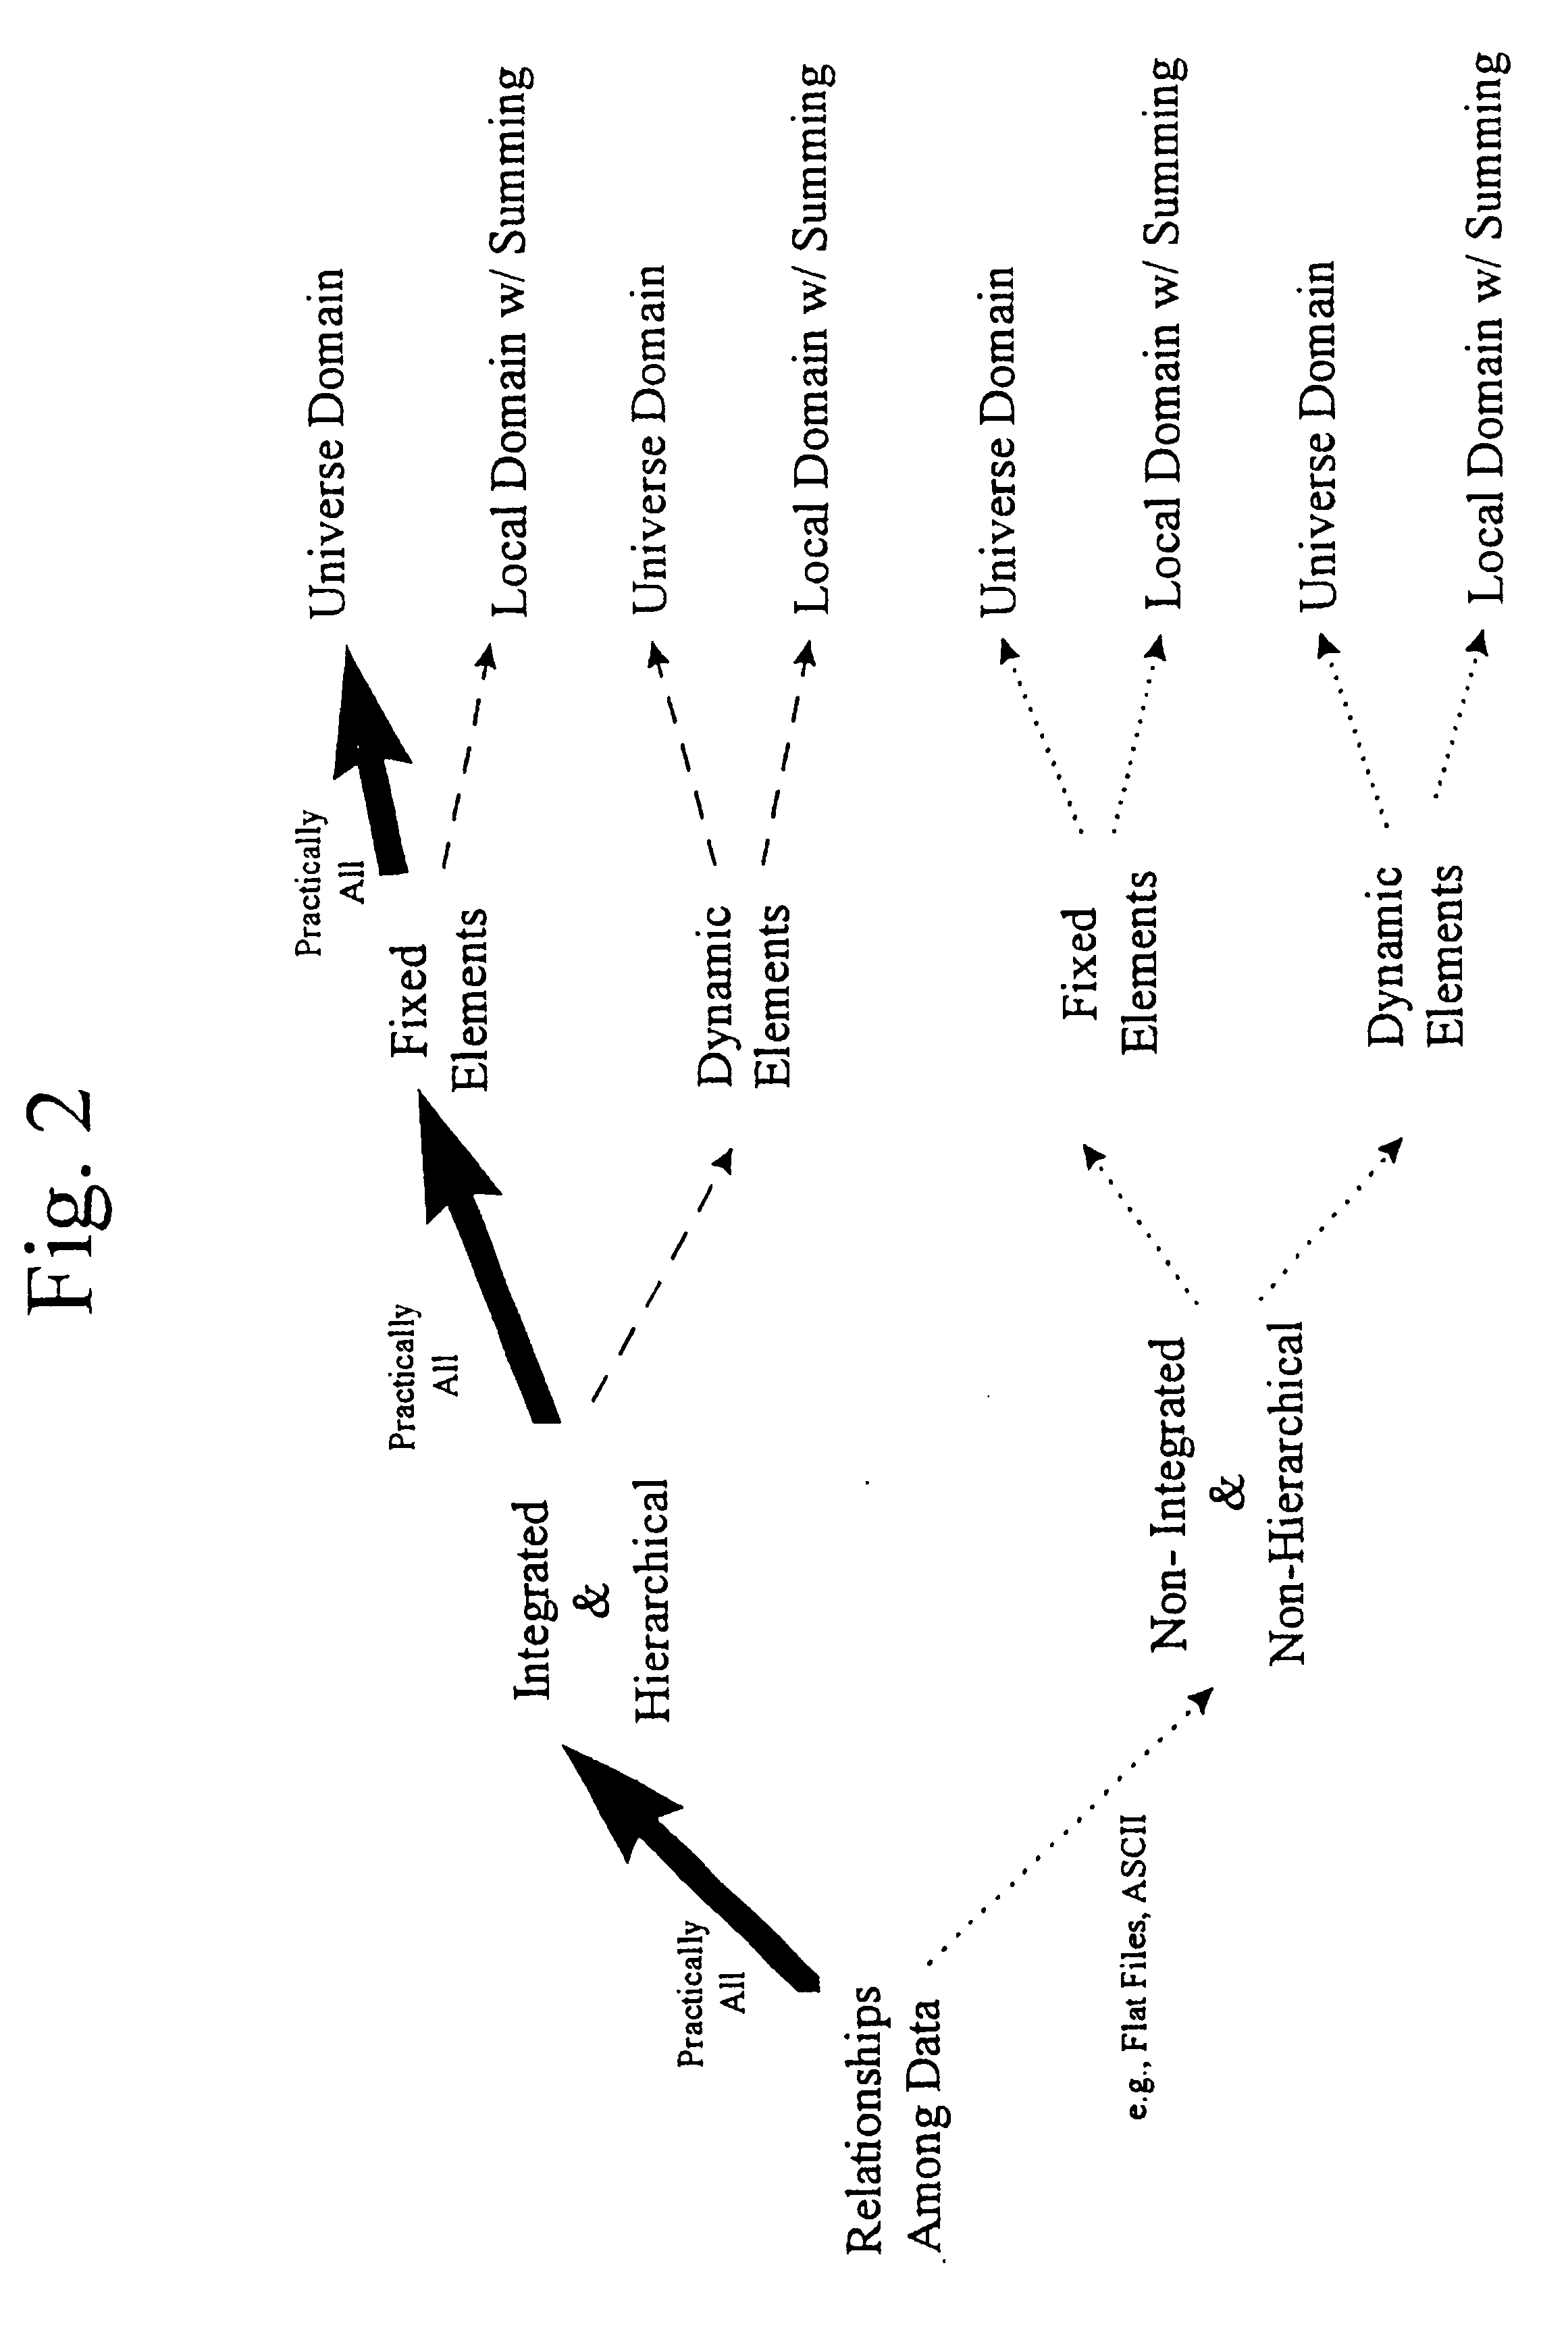 Method for modeling, storing and transferring data in neutral form